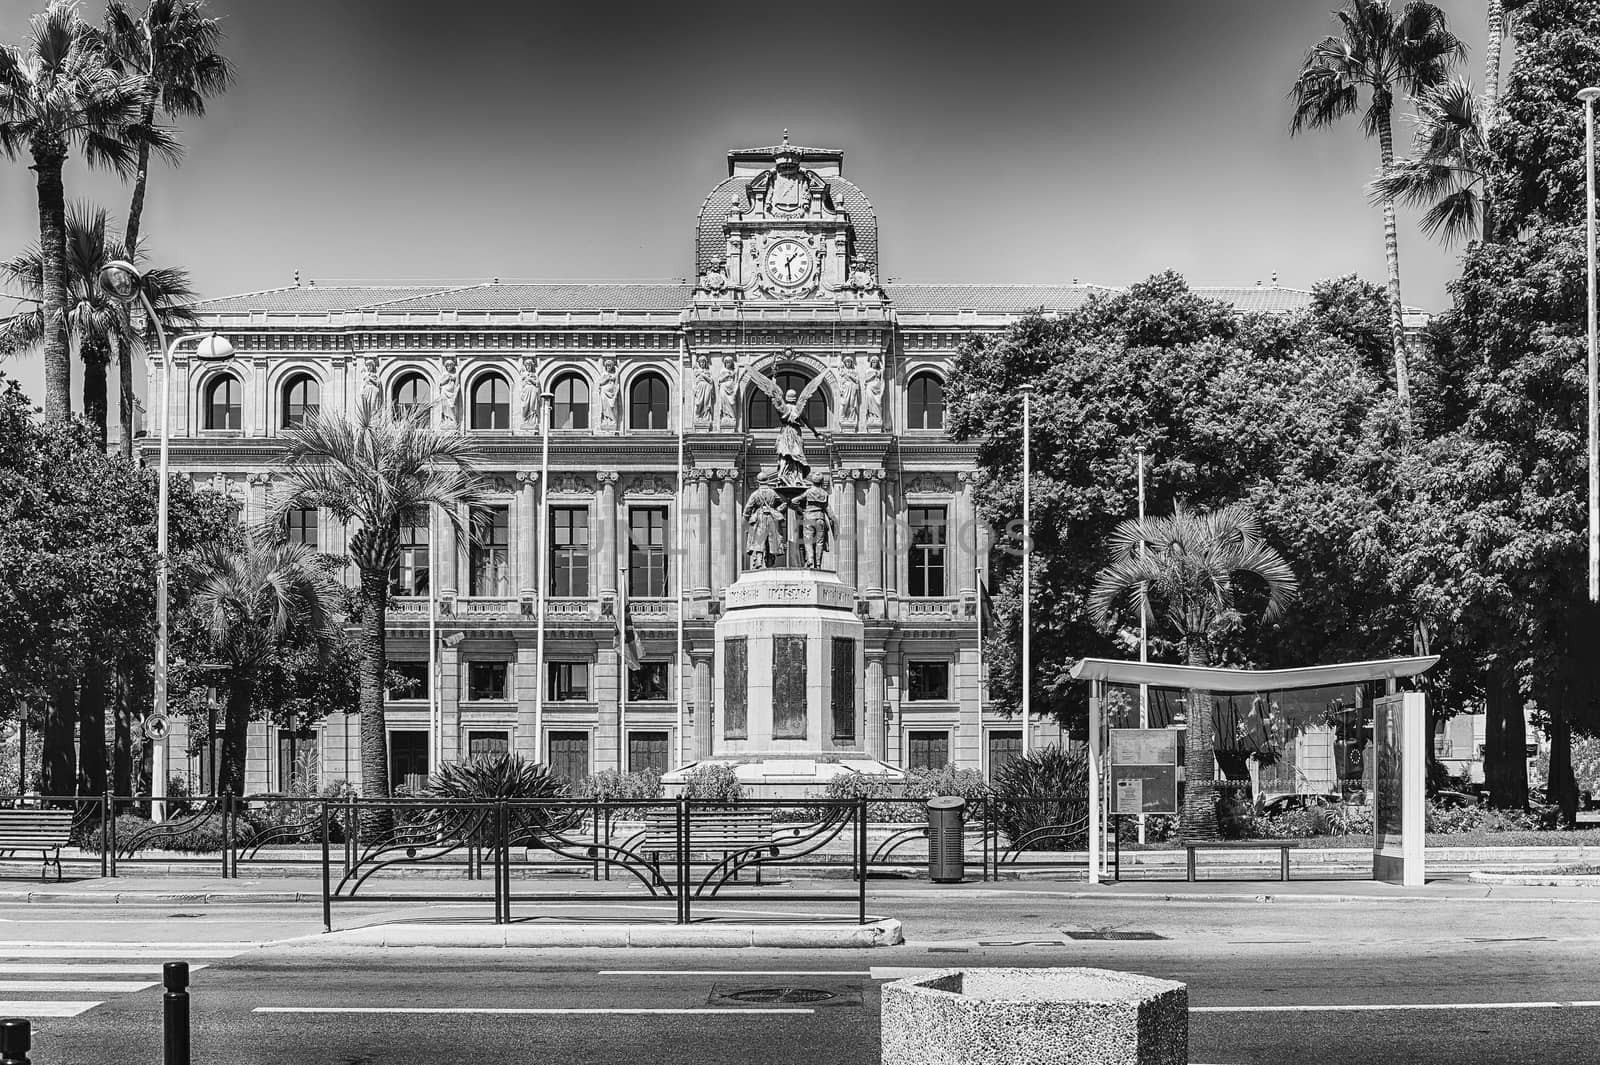 Facade of the Town Hall in Cannes, Cote d'Azur, France by marcorubino